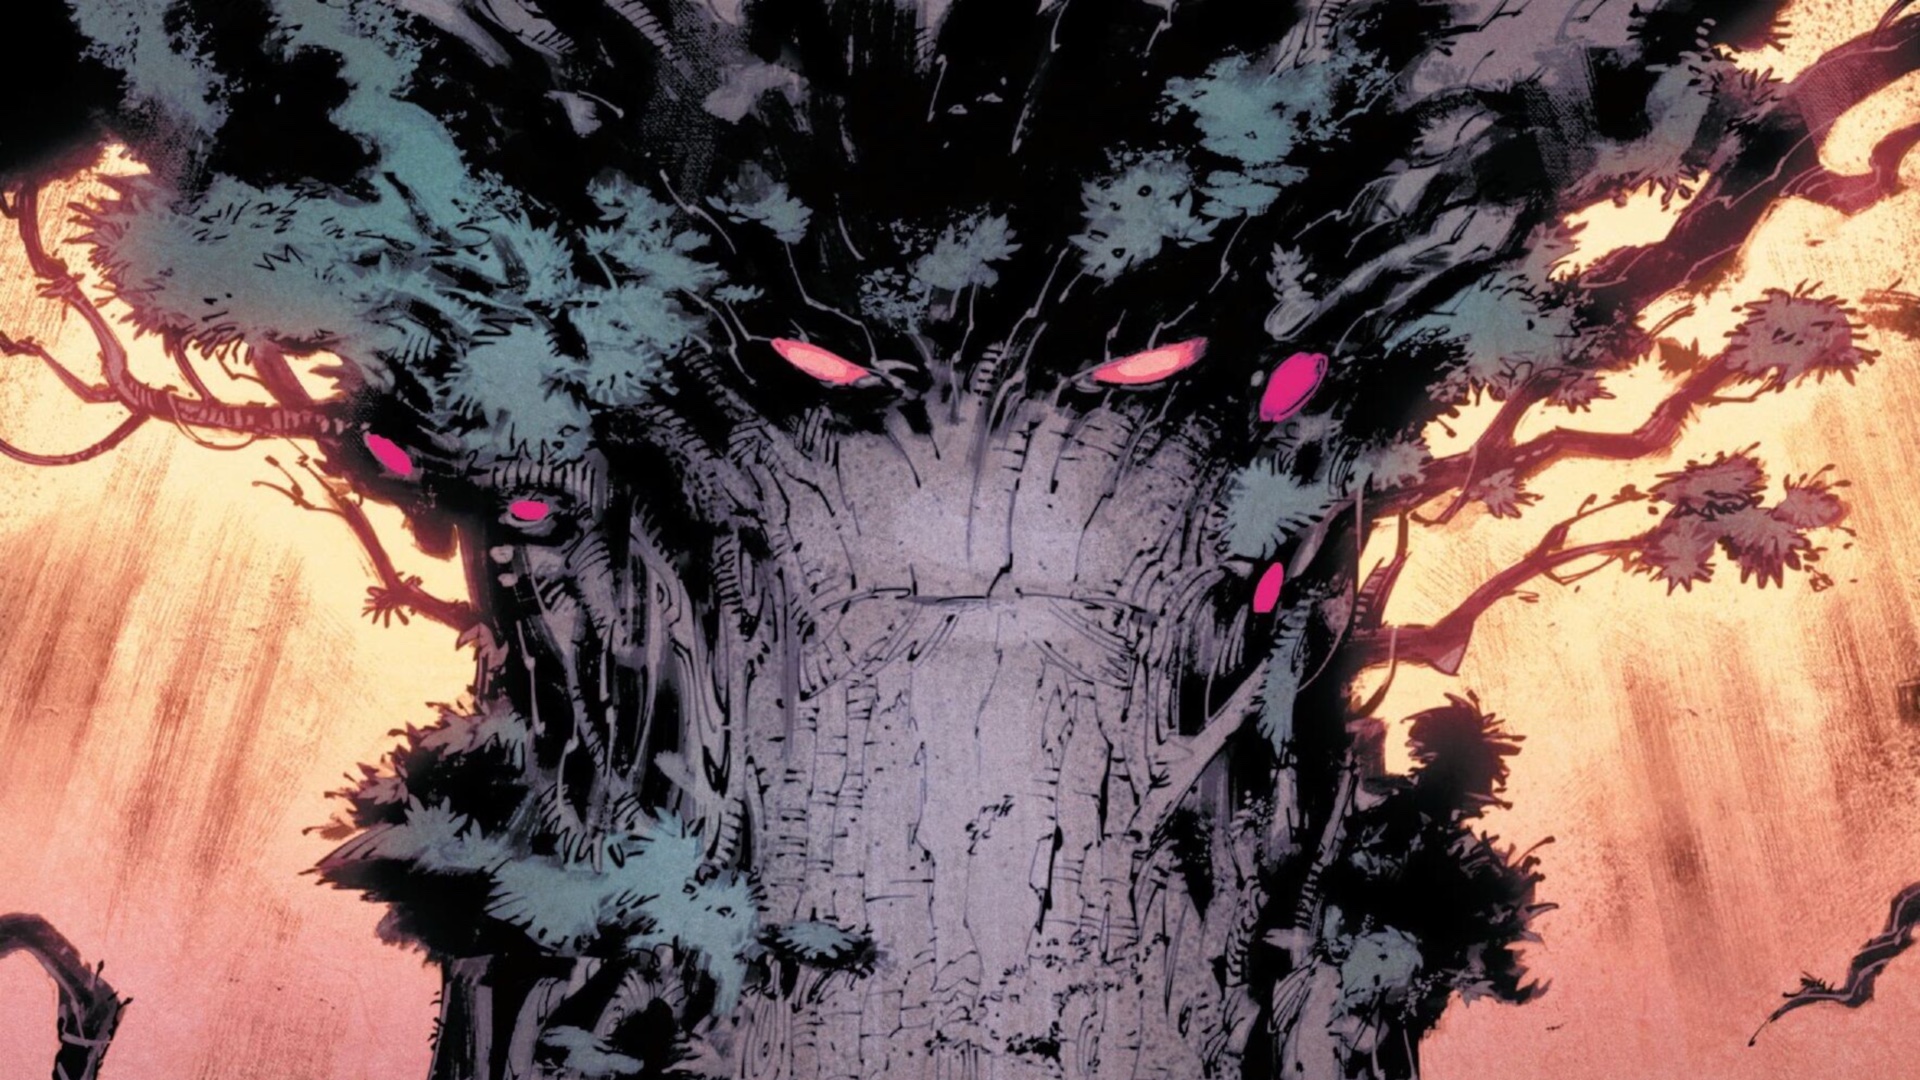 Will The X Men Hellfire Gala Event End In The Murder Of Krakoa Itself Examining The Clues 4955